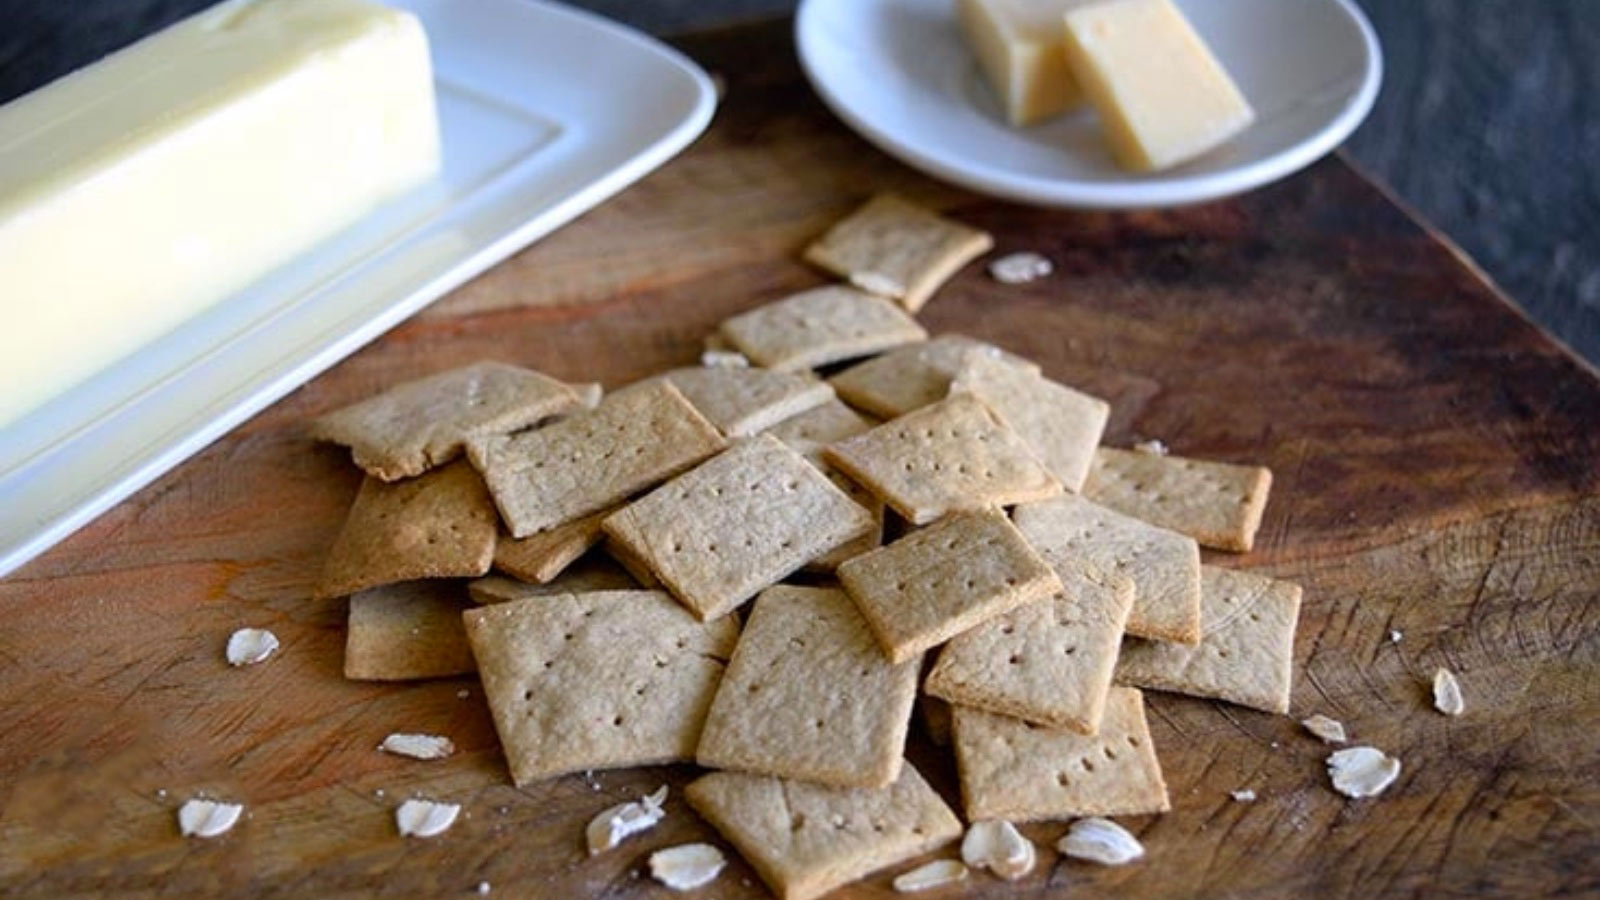 <p>These gluten-free <a href="https://www.thegraciouspantry.com/oat-crackers-recipe/">oat crackers </a>are easy to make and taste amazing, unlike some store-bought versions. You only need seven ingredients and a little time, and you’ll have healthy crackers for snacks in no time. Serve them with your favorite dips, or just enjoy them by themselves.</p>